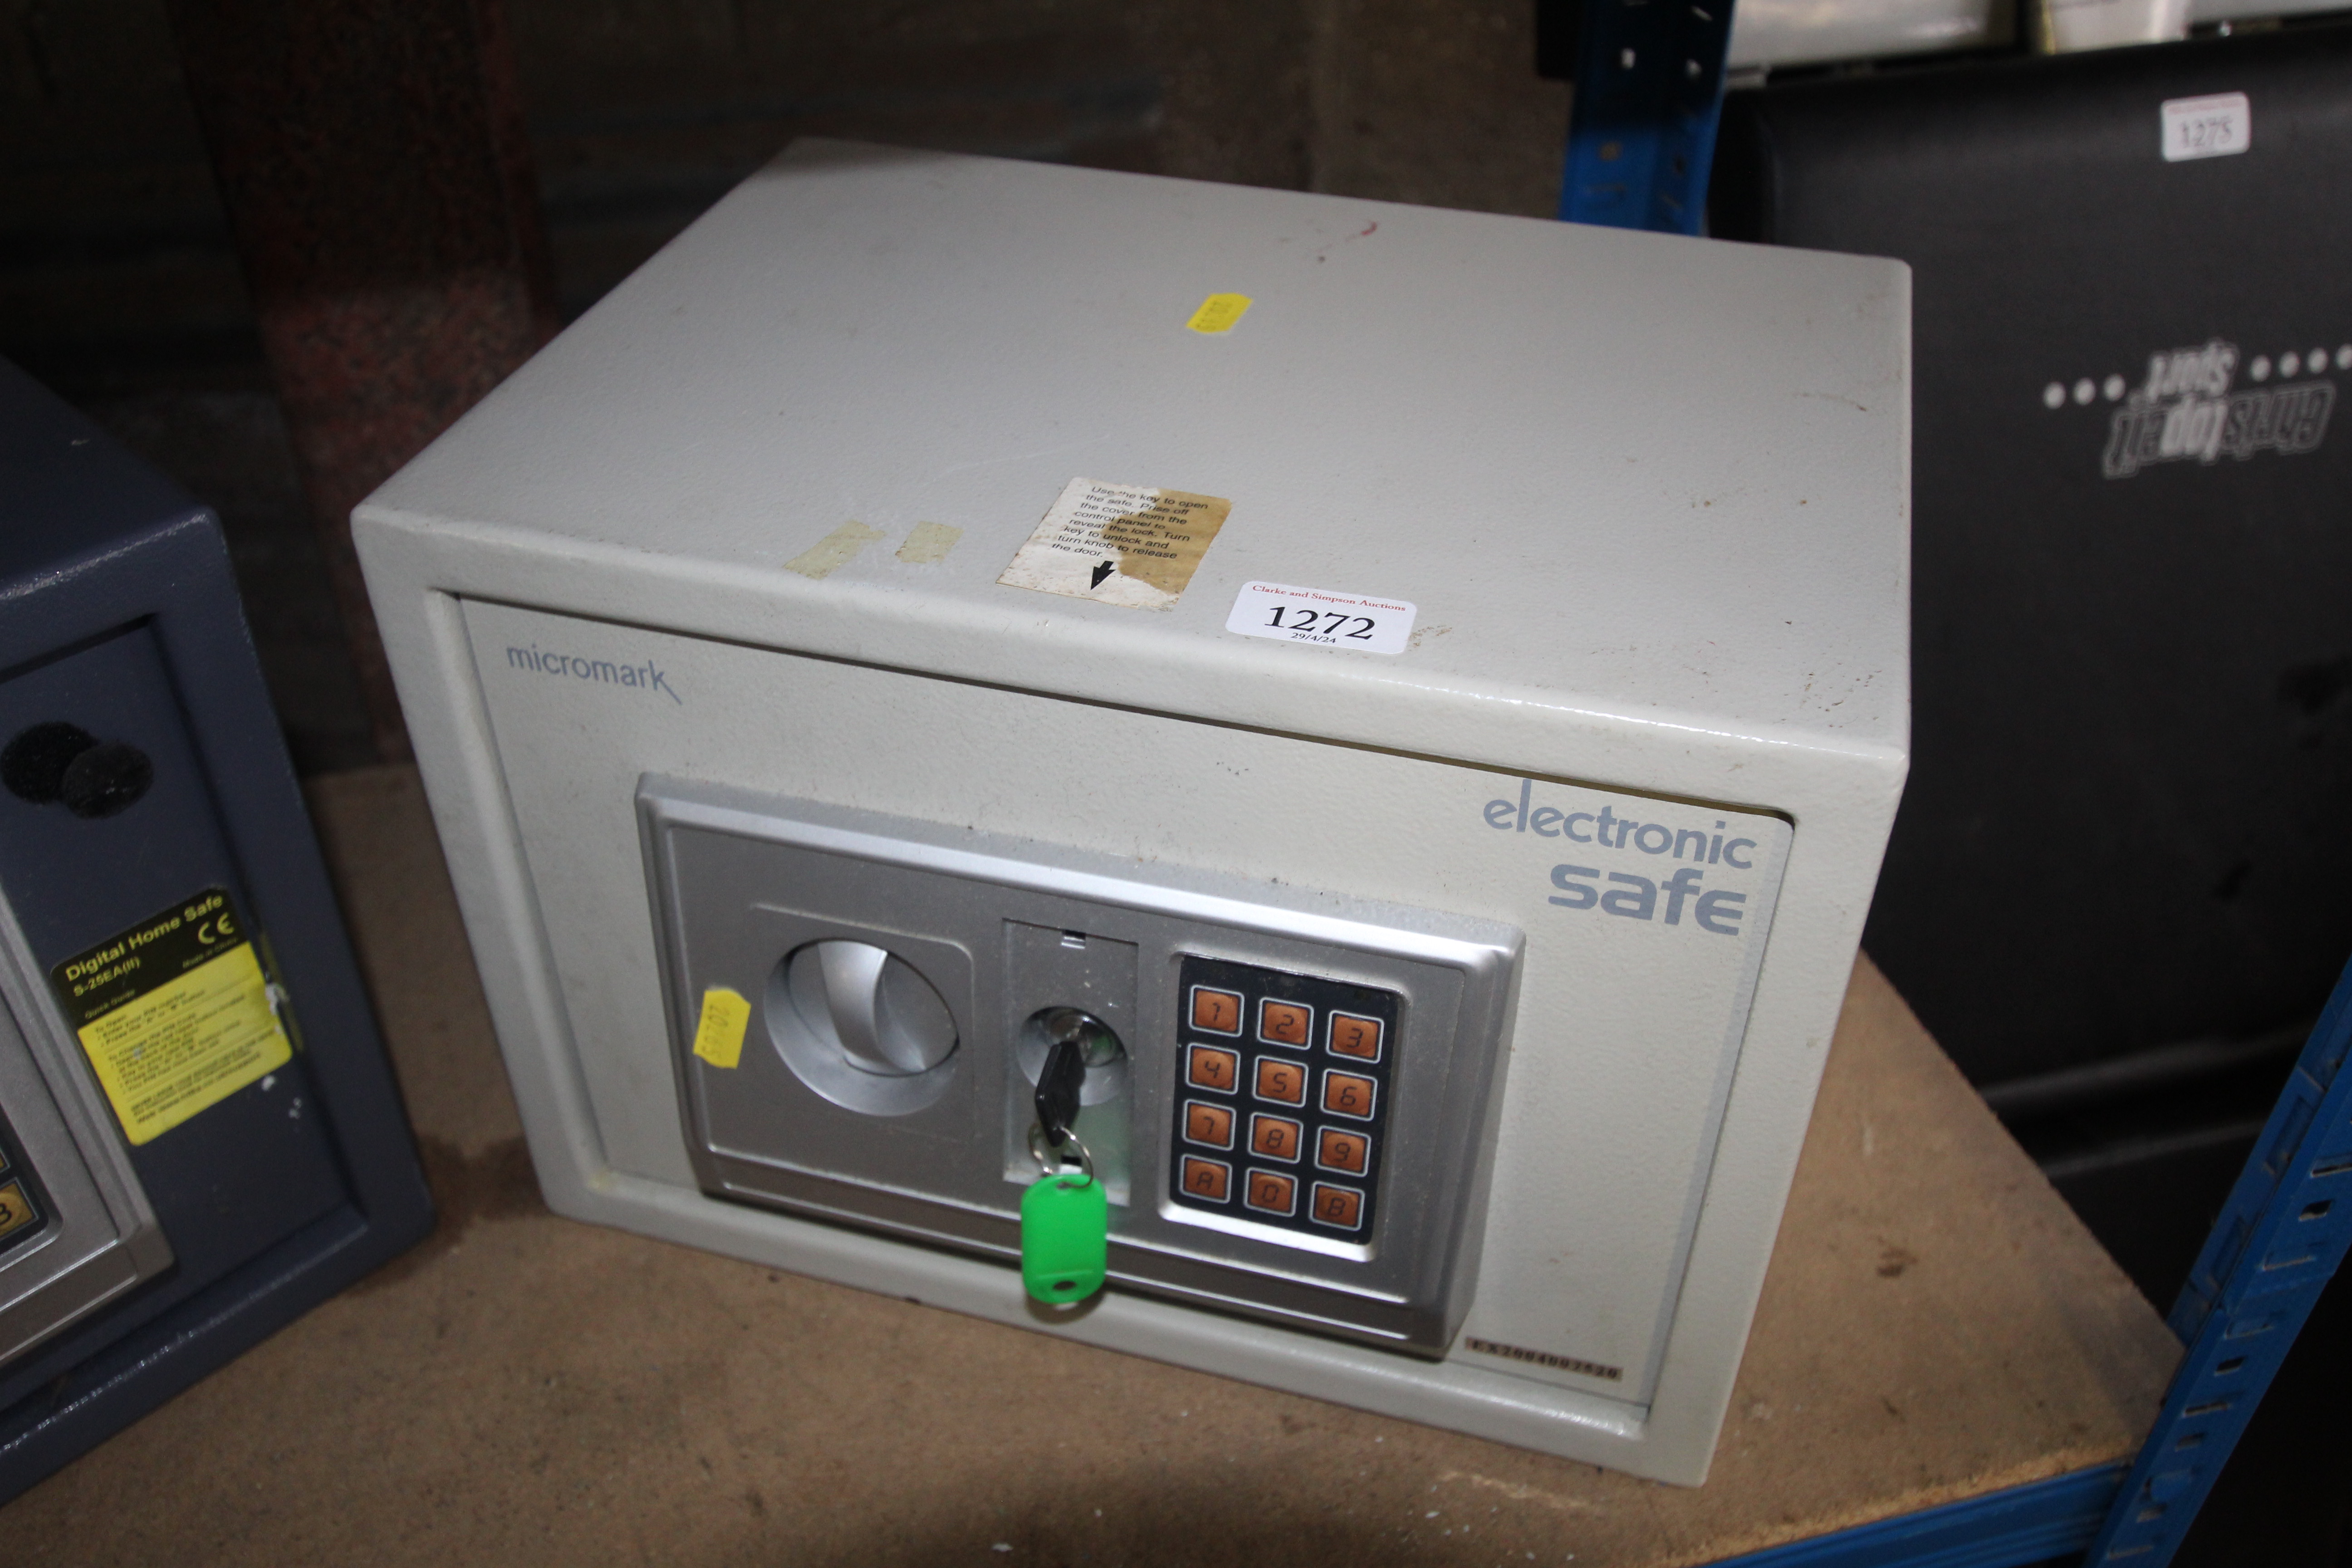 A Micromark electronic safe with key